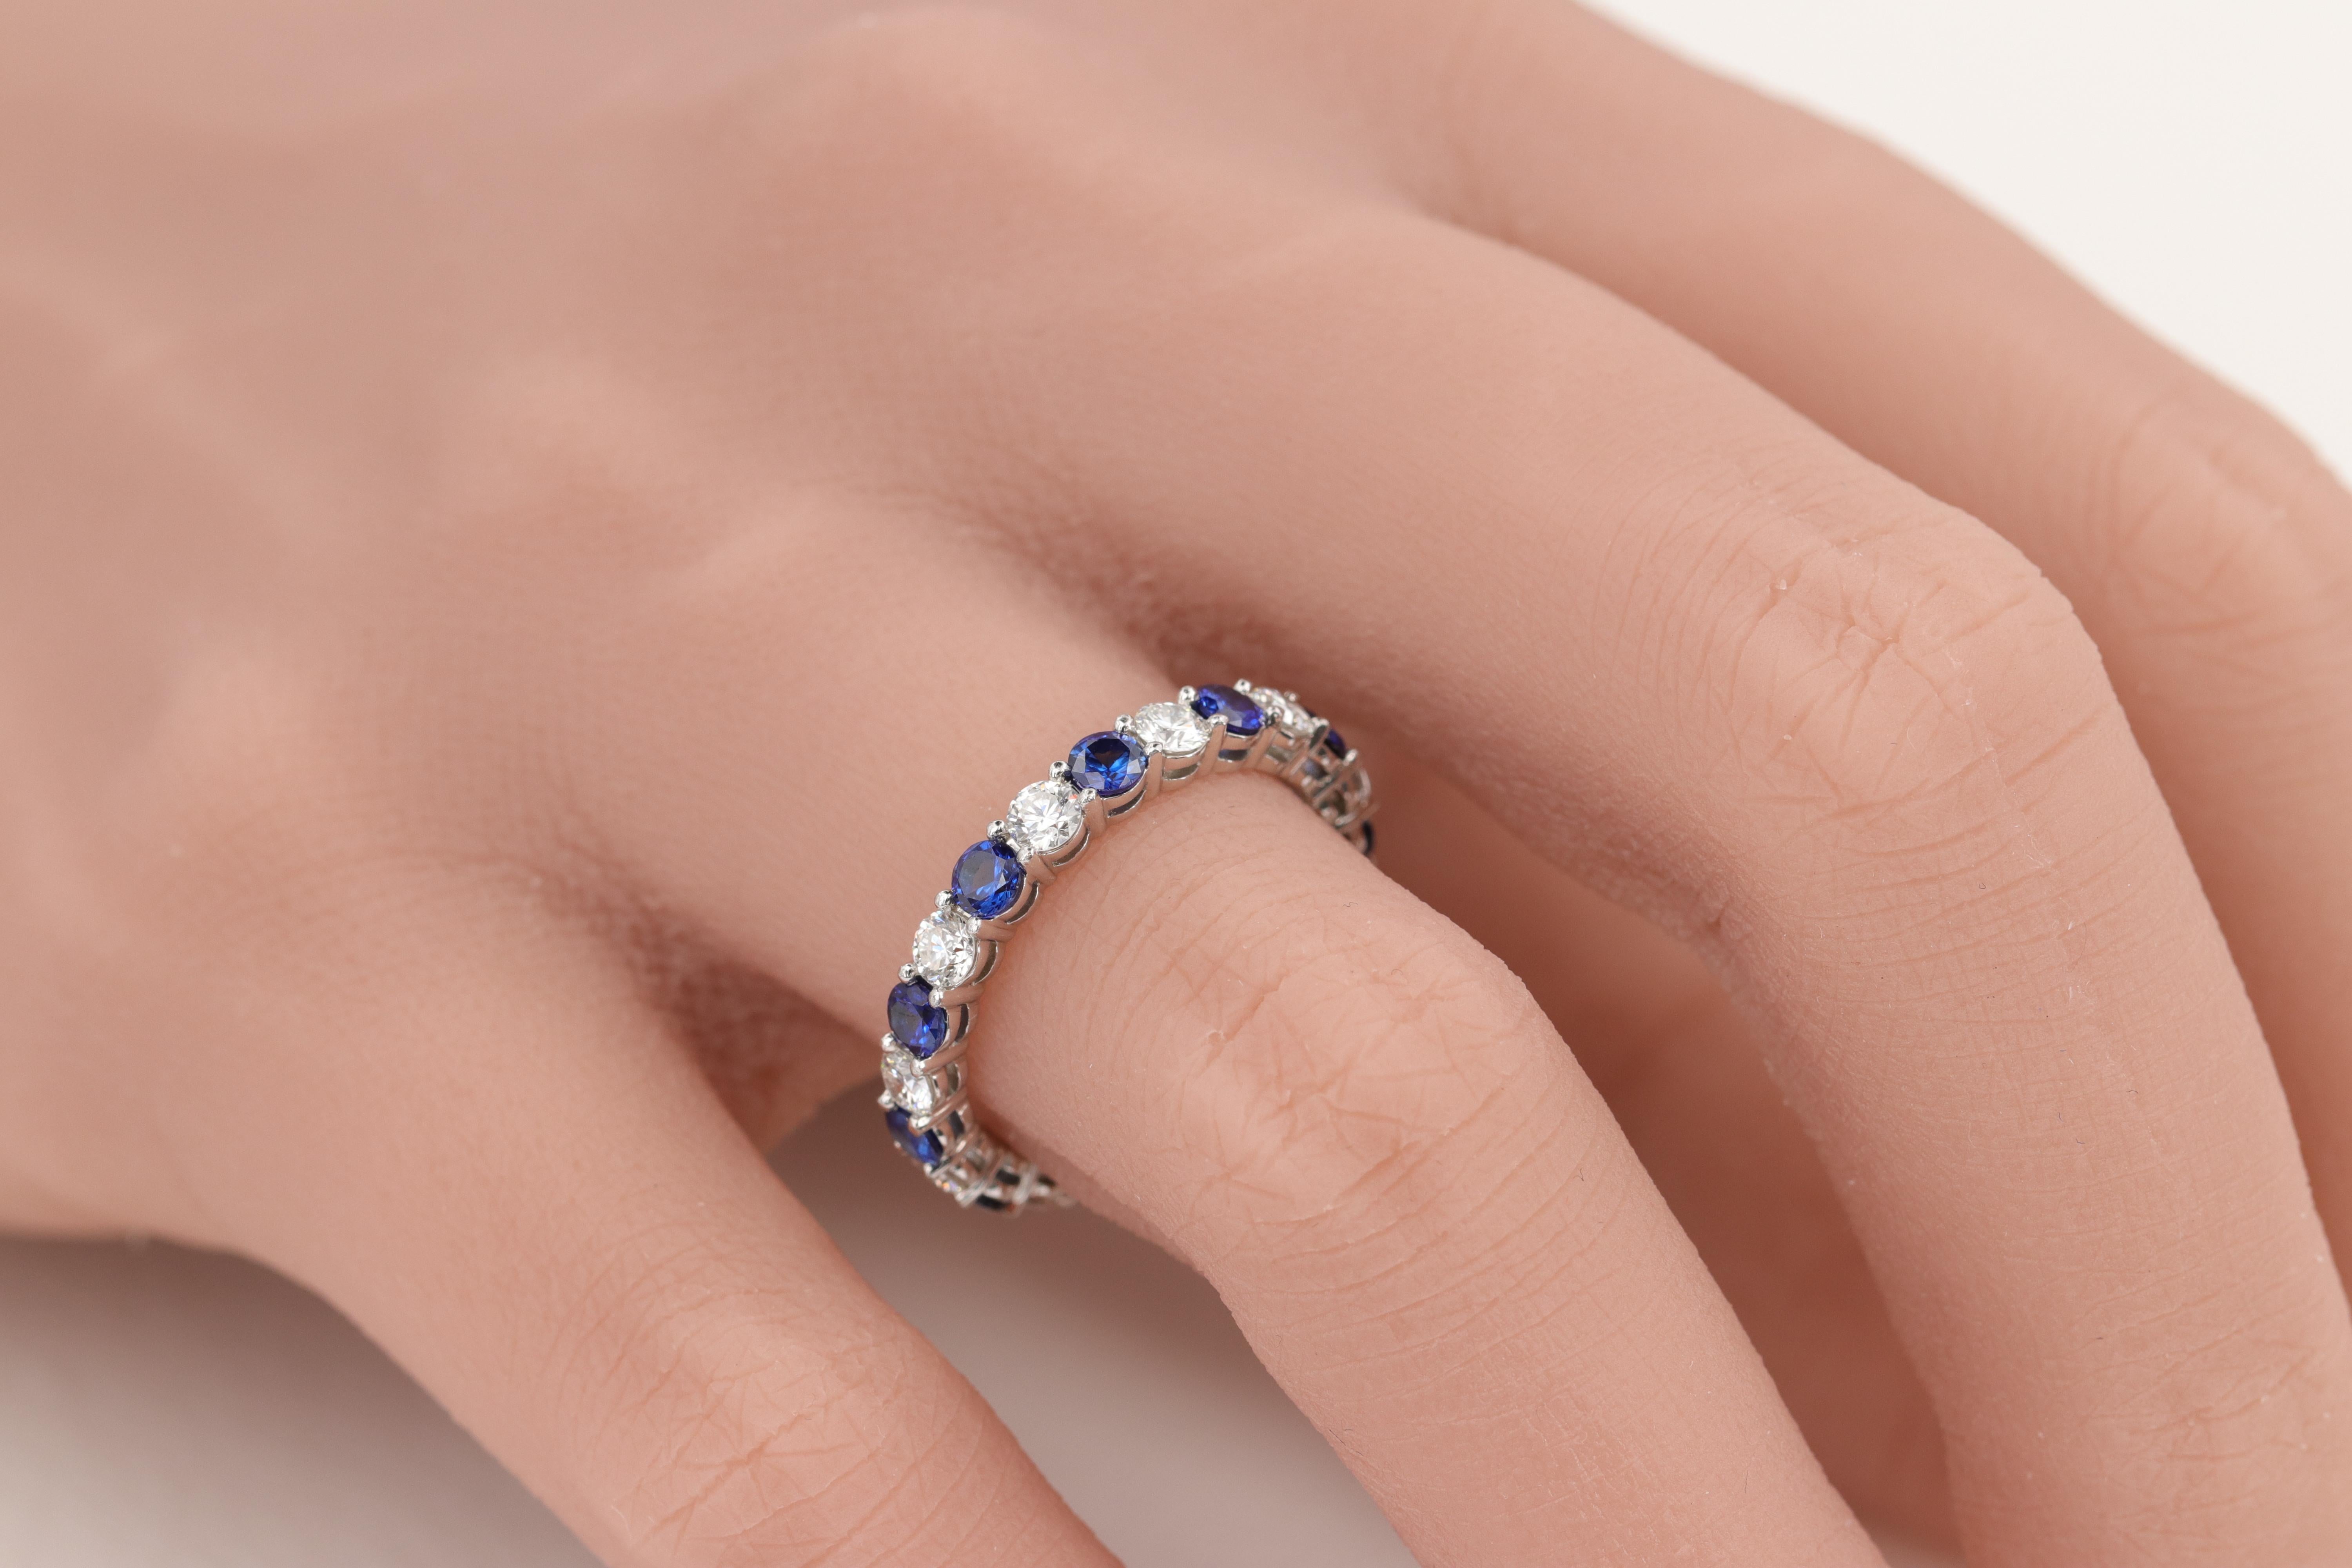 Tiffany & Co. Embrace Sapphire and Diamond Eternity Band Ring Set in Platinum 

Stones: 

Diamonds - 11 = 0.85ctw
Color - D-F
 Clarity - VS +

Sapphires - 11 = 1.10ctw
Color - Vivid Blue
Clarity - Eye Clean 

Ring: 

Metal - Platinum 
Weight - 4.6